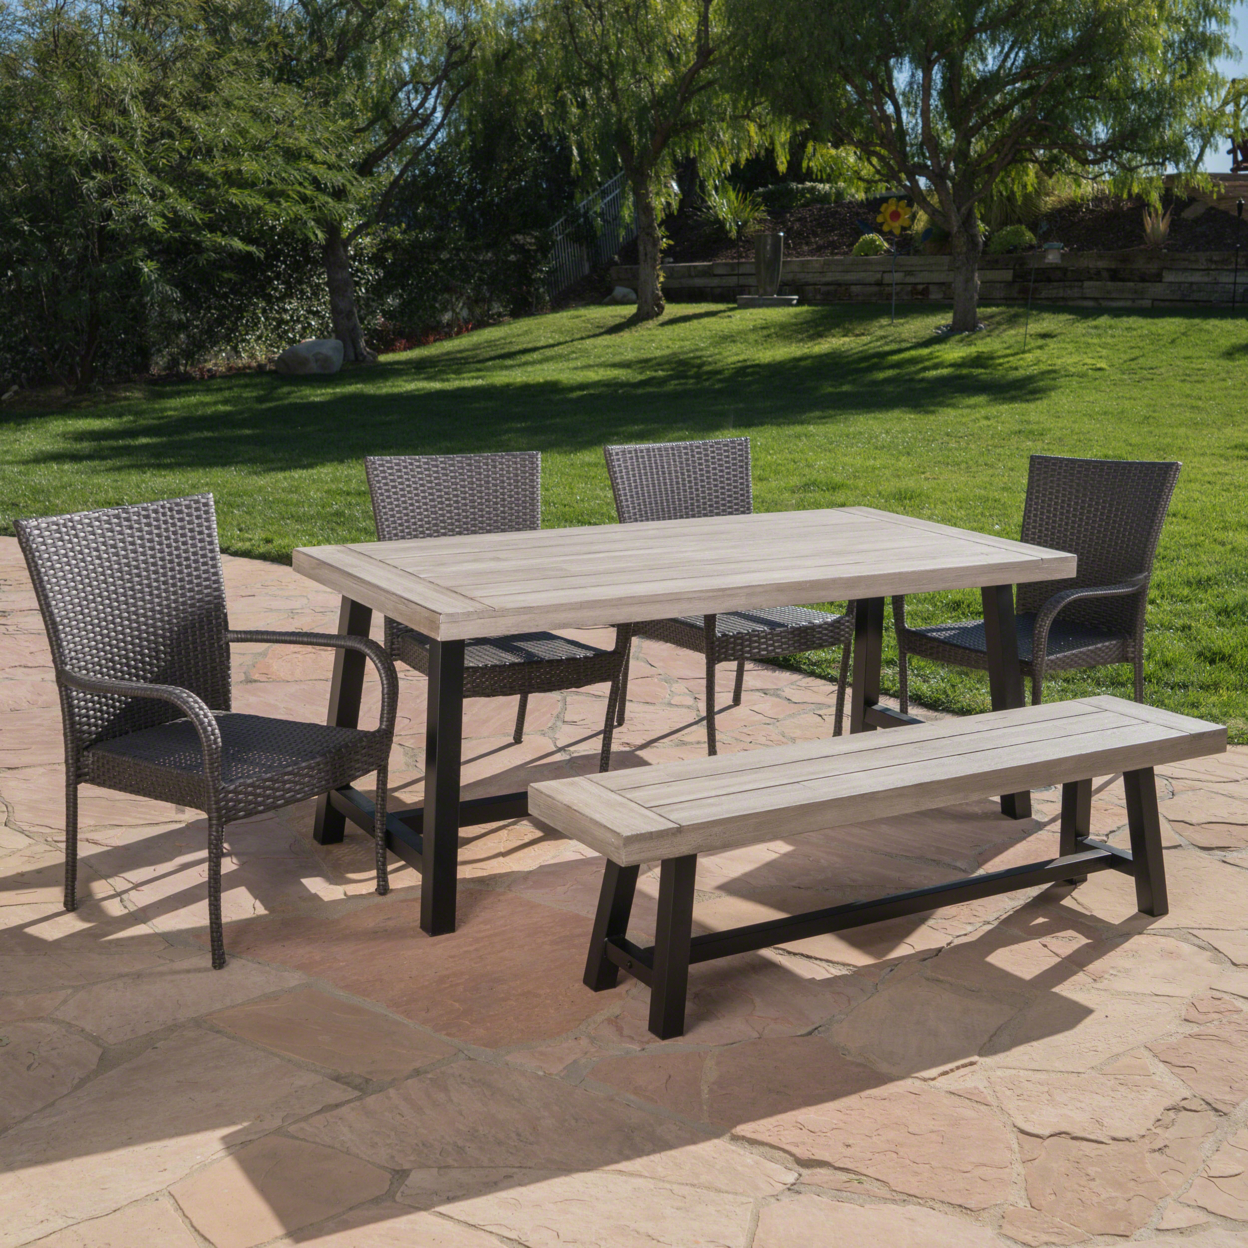 Cecilia Outdoor 6 Piece Stacking Wicker Dining Set With Acacia Wood Table And Bench - Gray/Light Gray